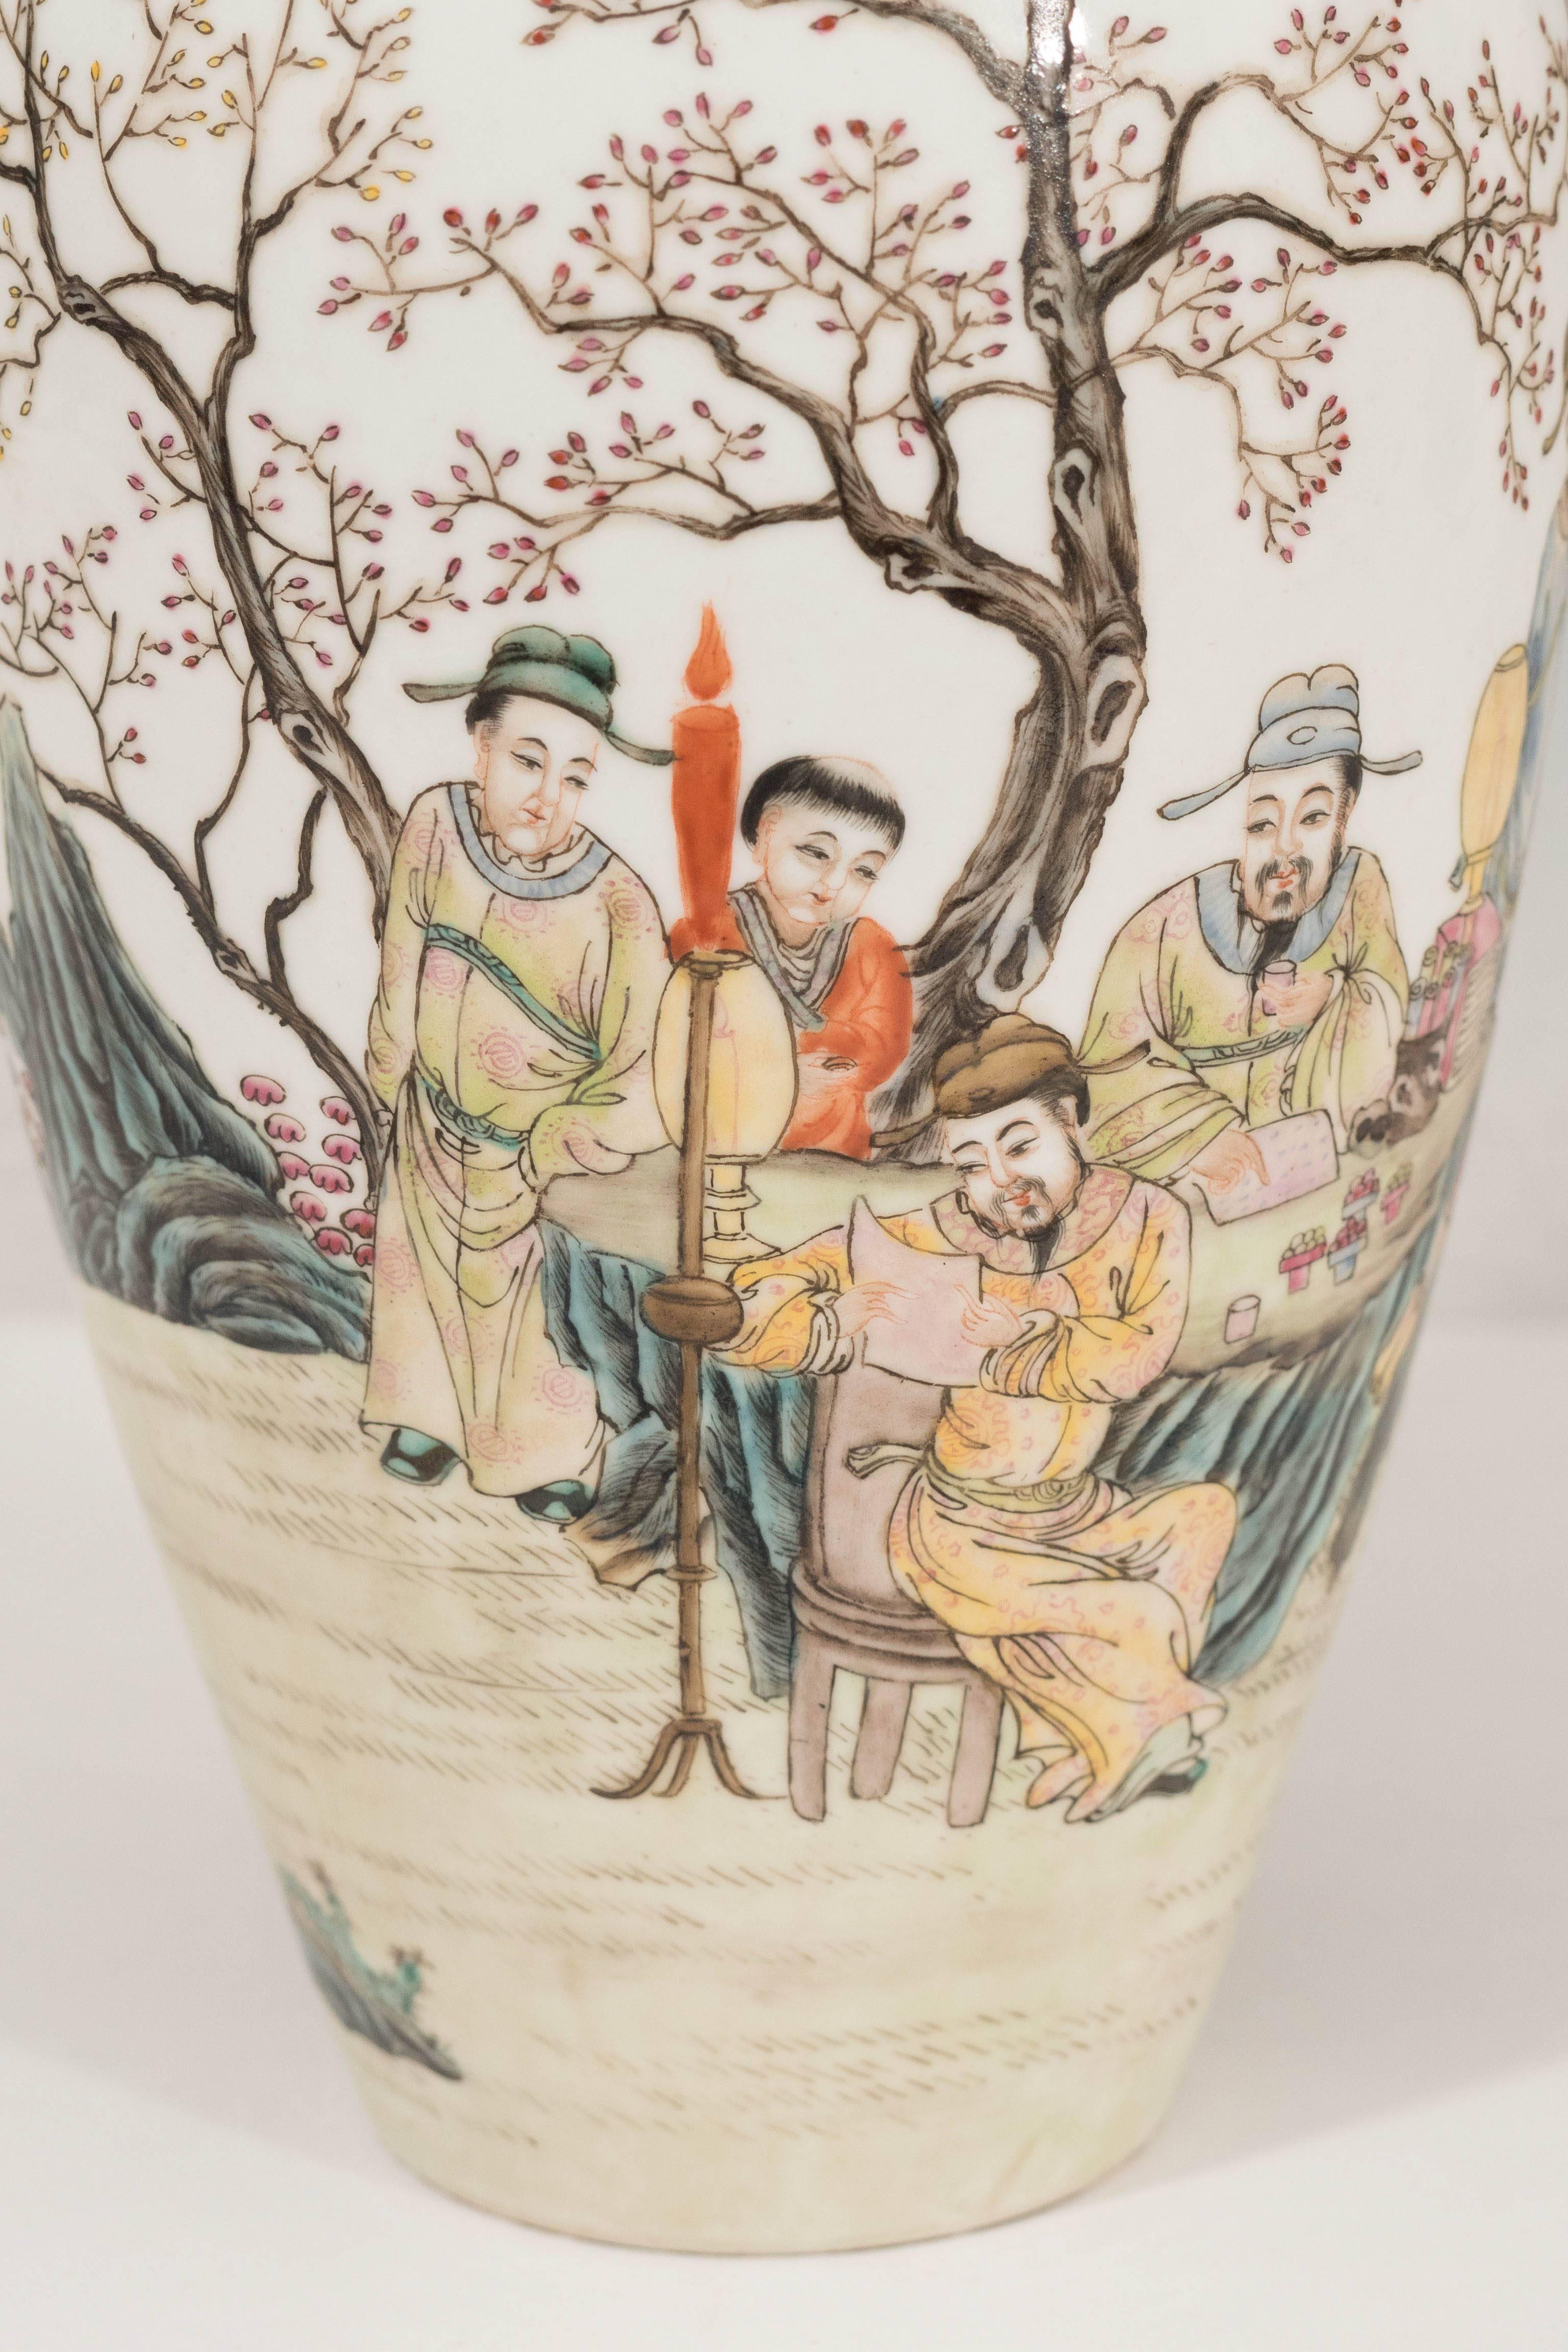 A Chinese baluster form vase with gilded rim, produced within the early to mid-20th century period, in hand-painted and glazed porcelain, depicting a gathering of figures within the natural setting. Stamped to underside with four-character Qianlong